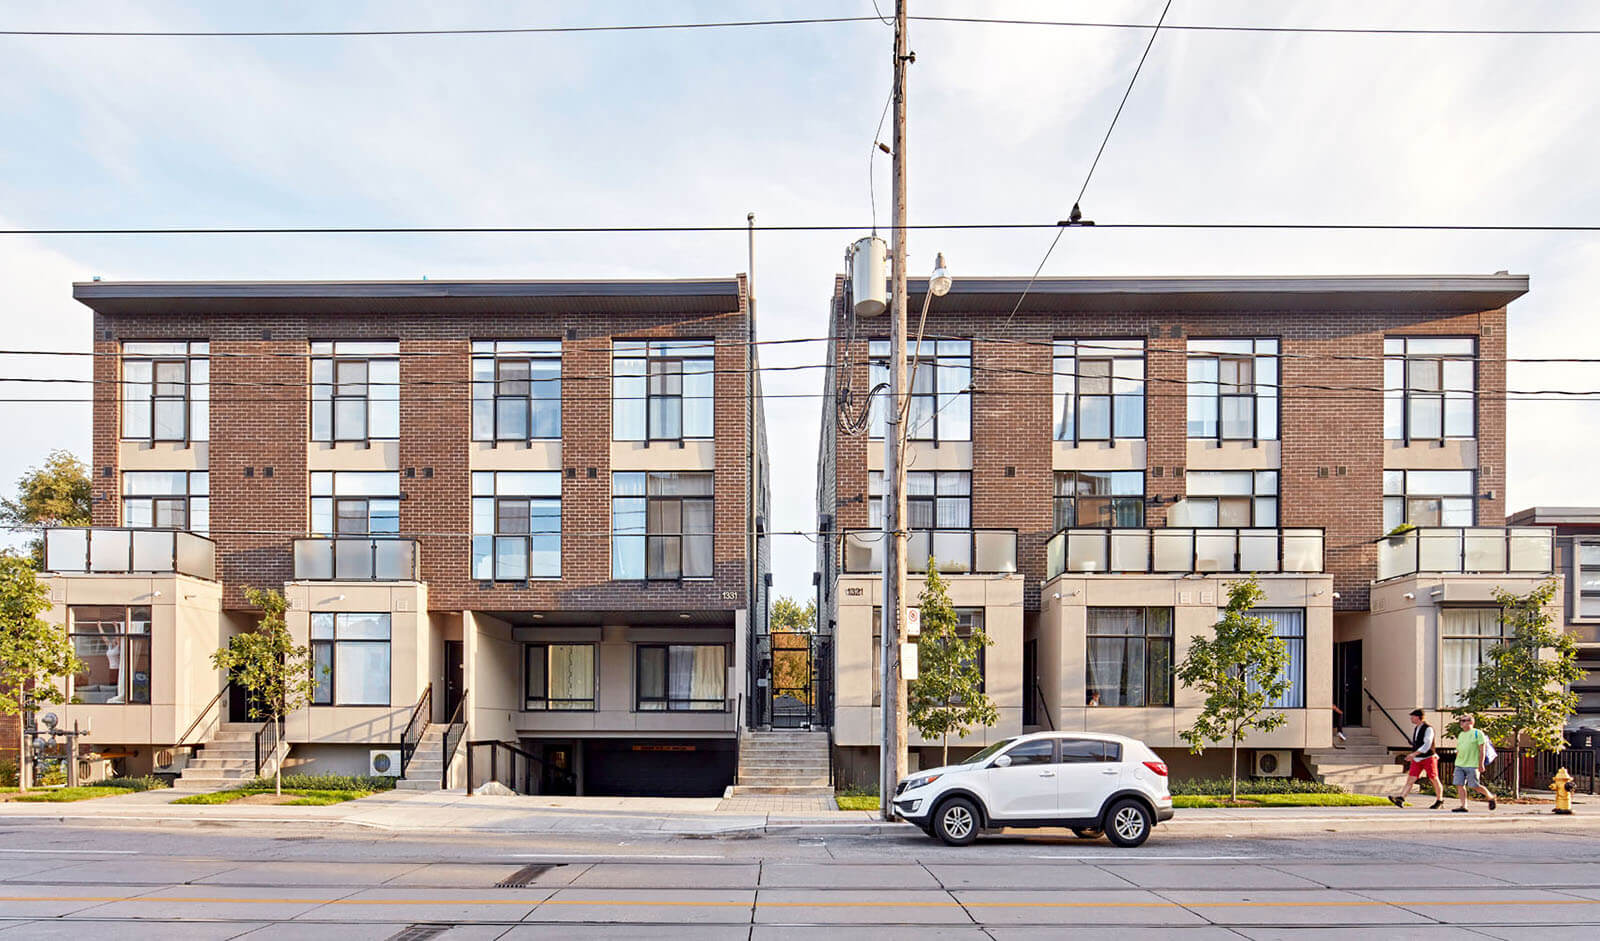 East Village Leslieville Showing Exterior Front of Buildings from Street Head On